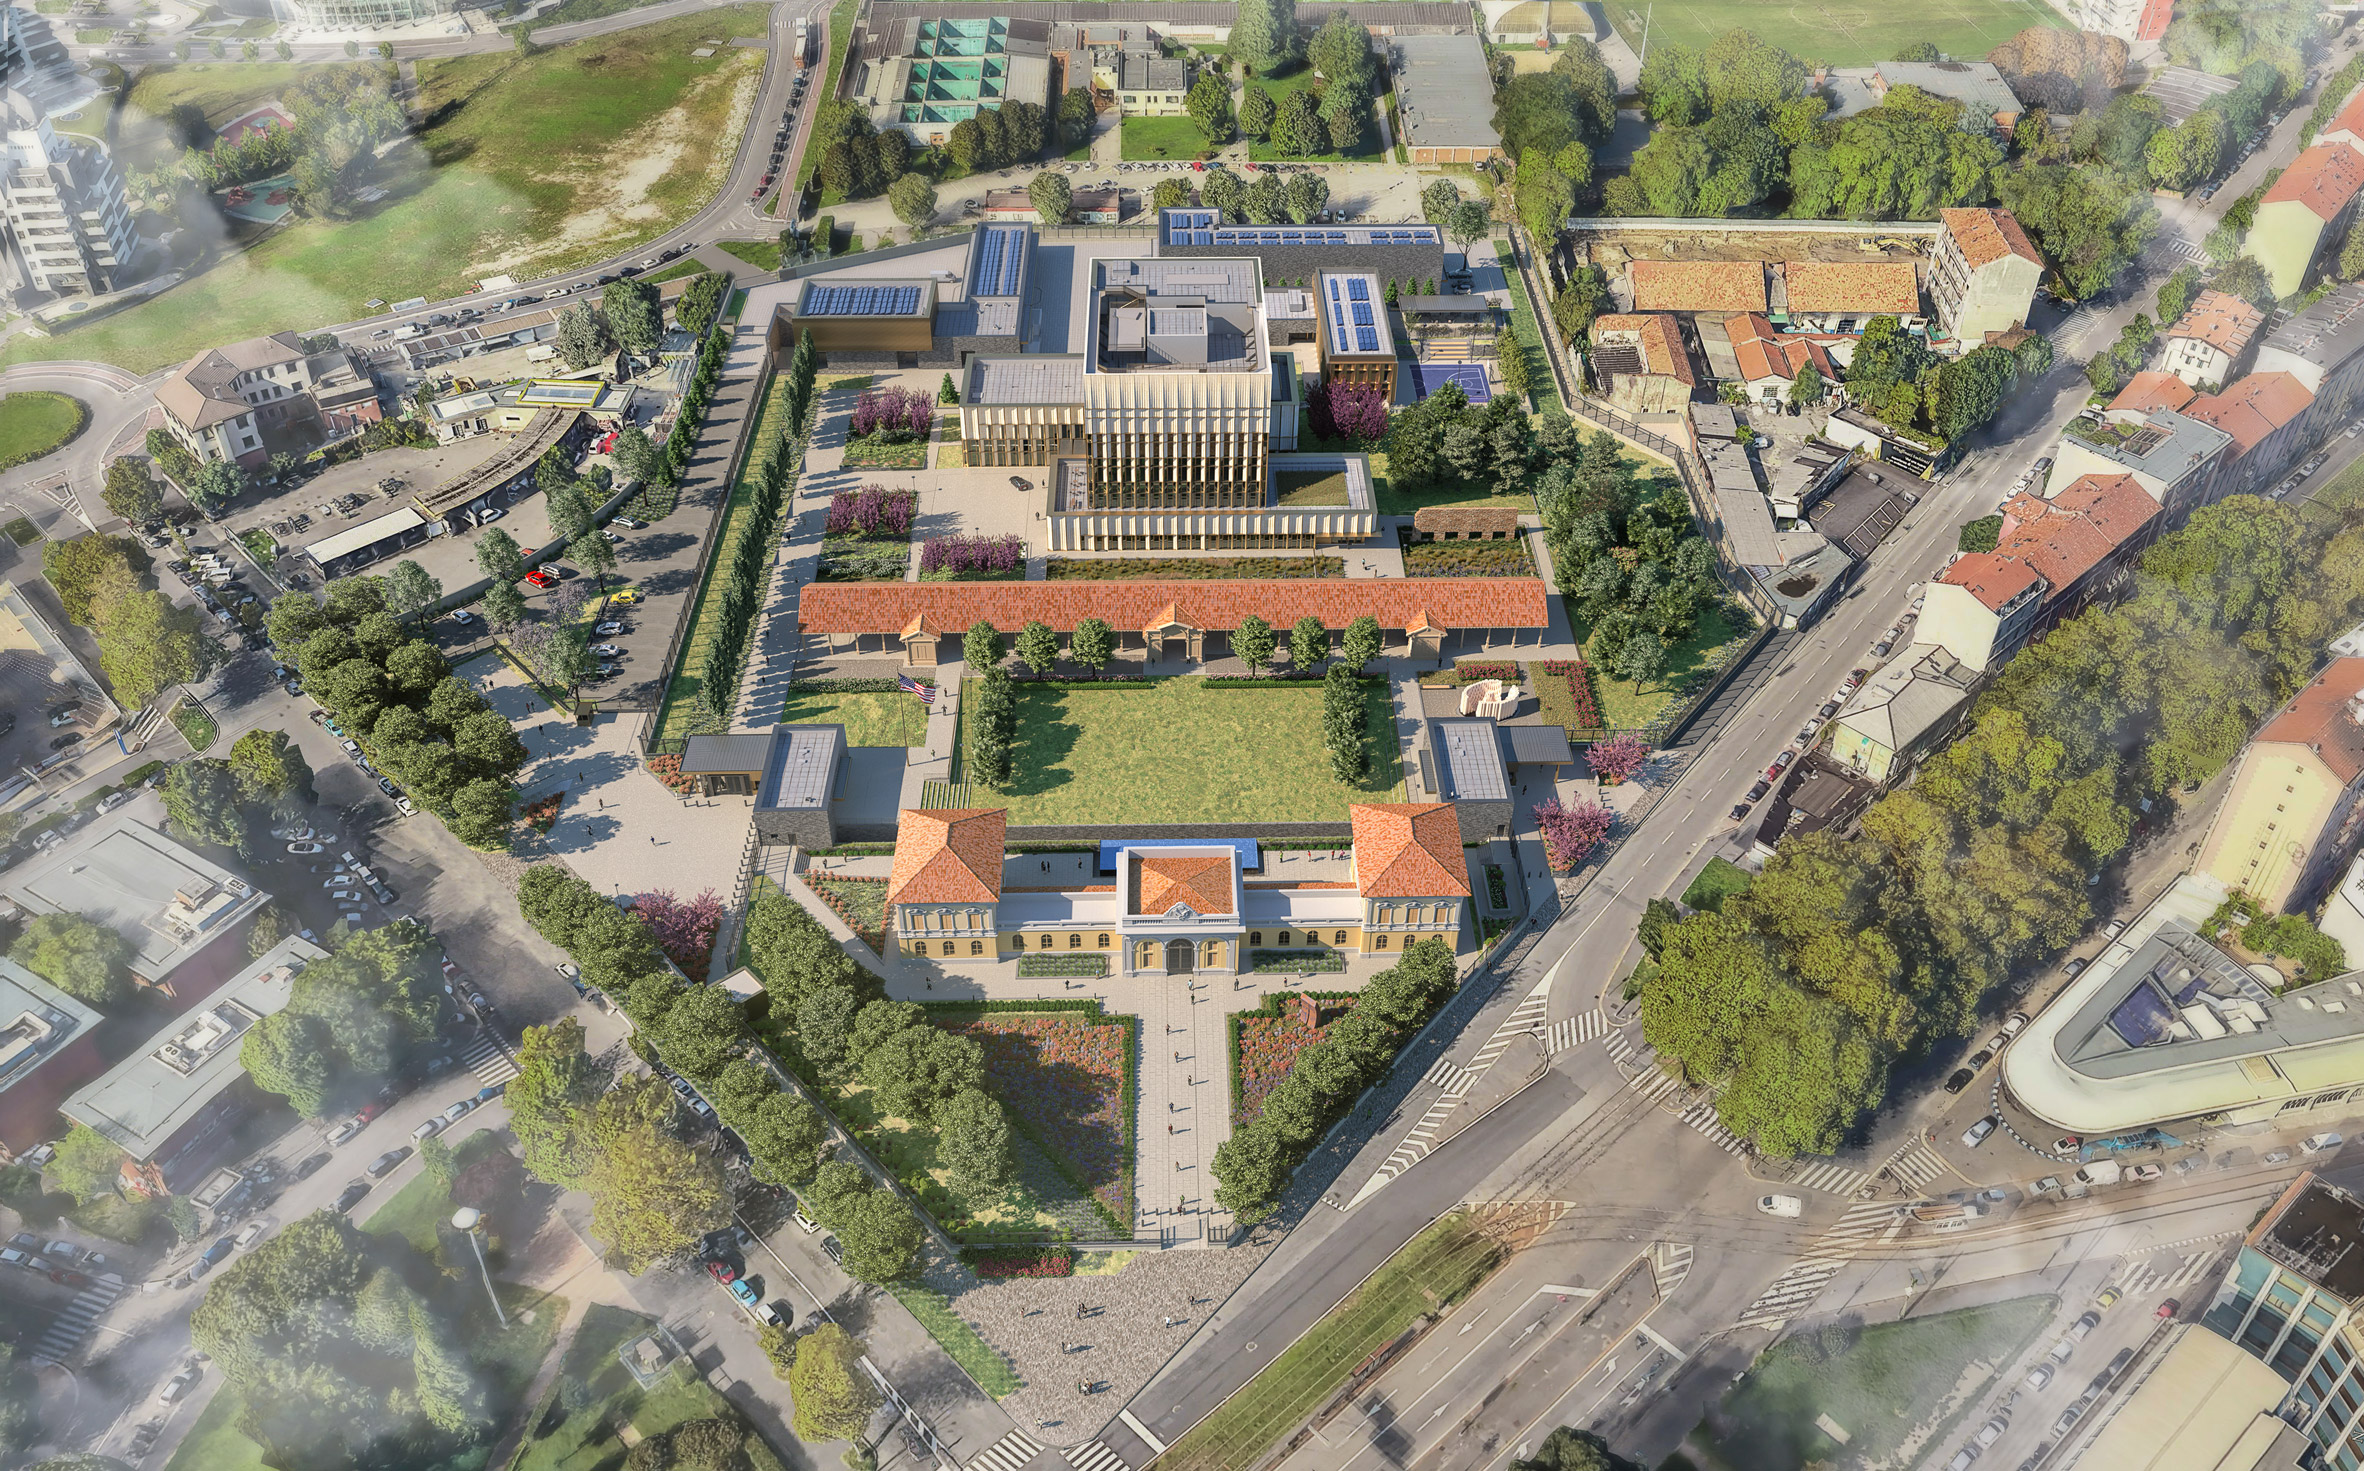 Aerial render of the New Consulate Campus which was designed by SHoP Architects